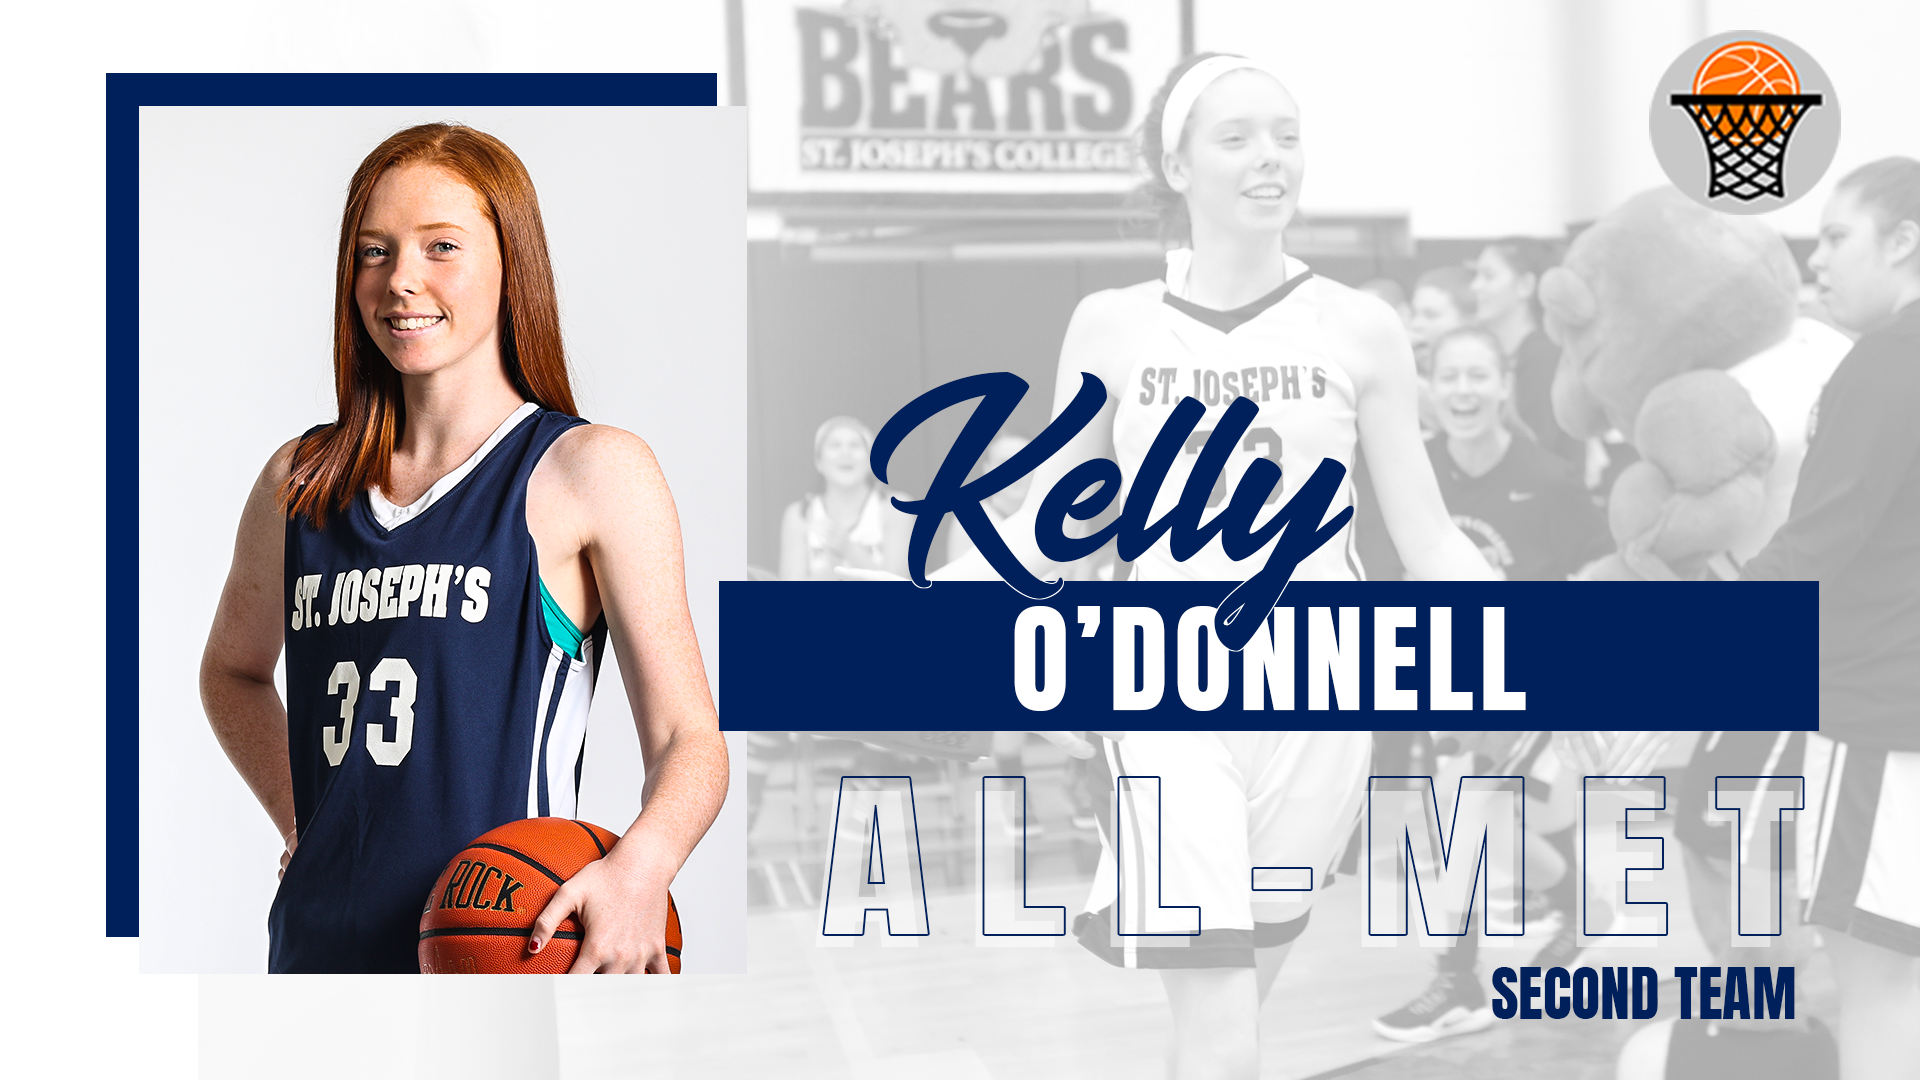 O’Donnell Receives All-Met Second Team Recognition